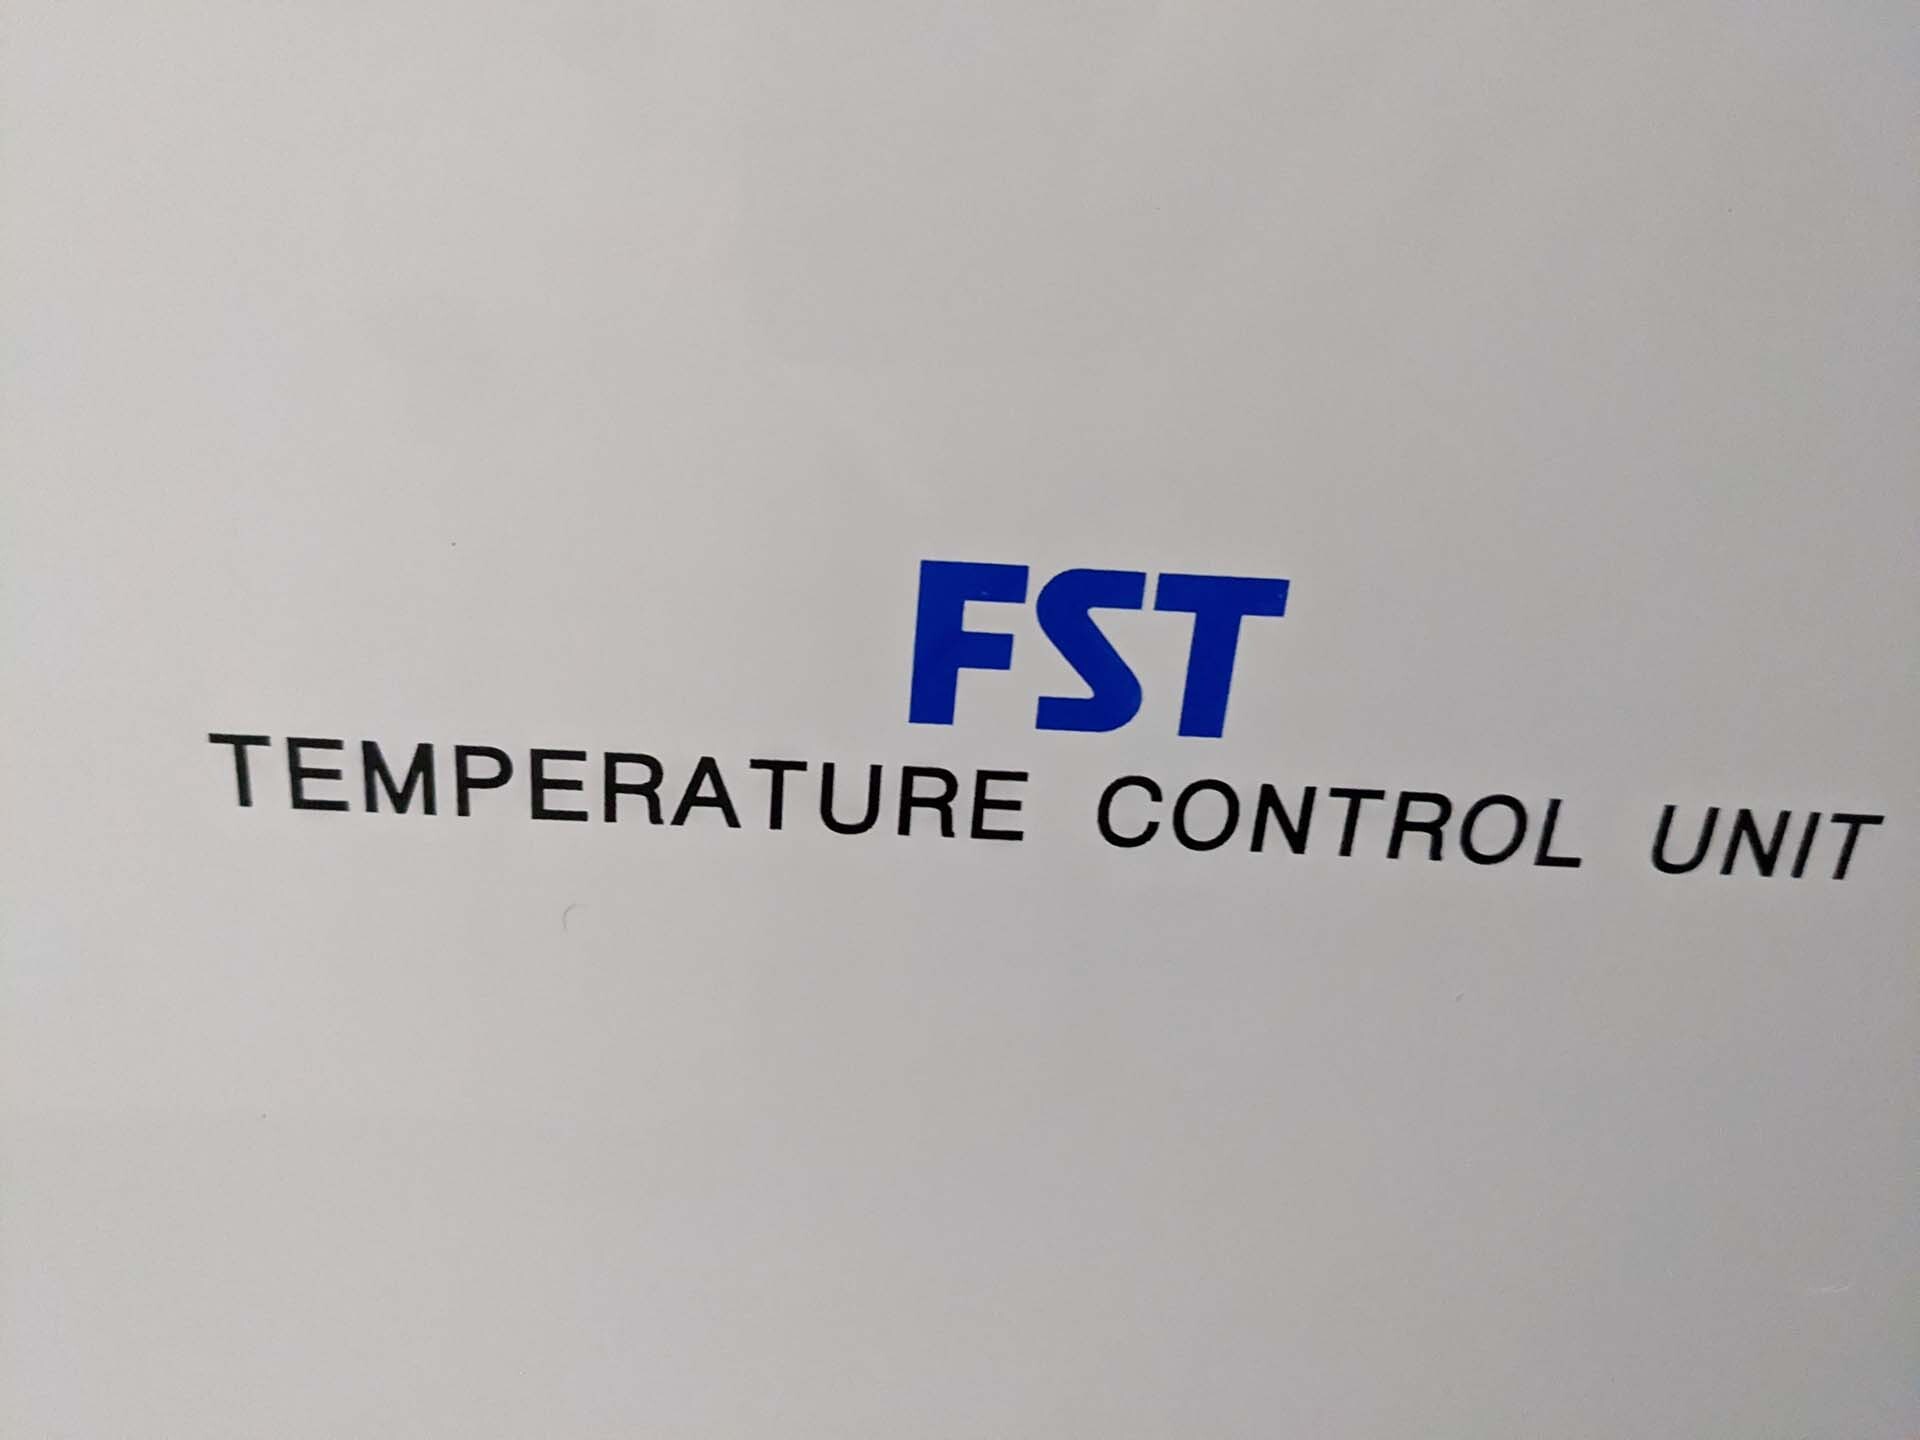 Photo Used FST FSTC-CT352 For Sale